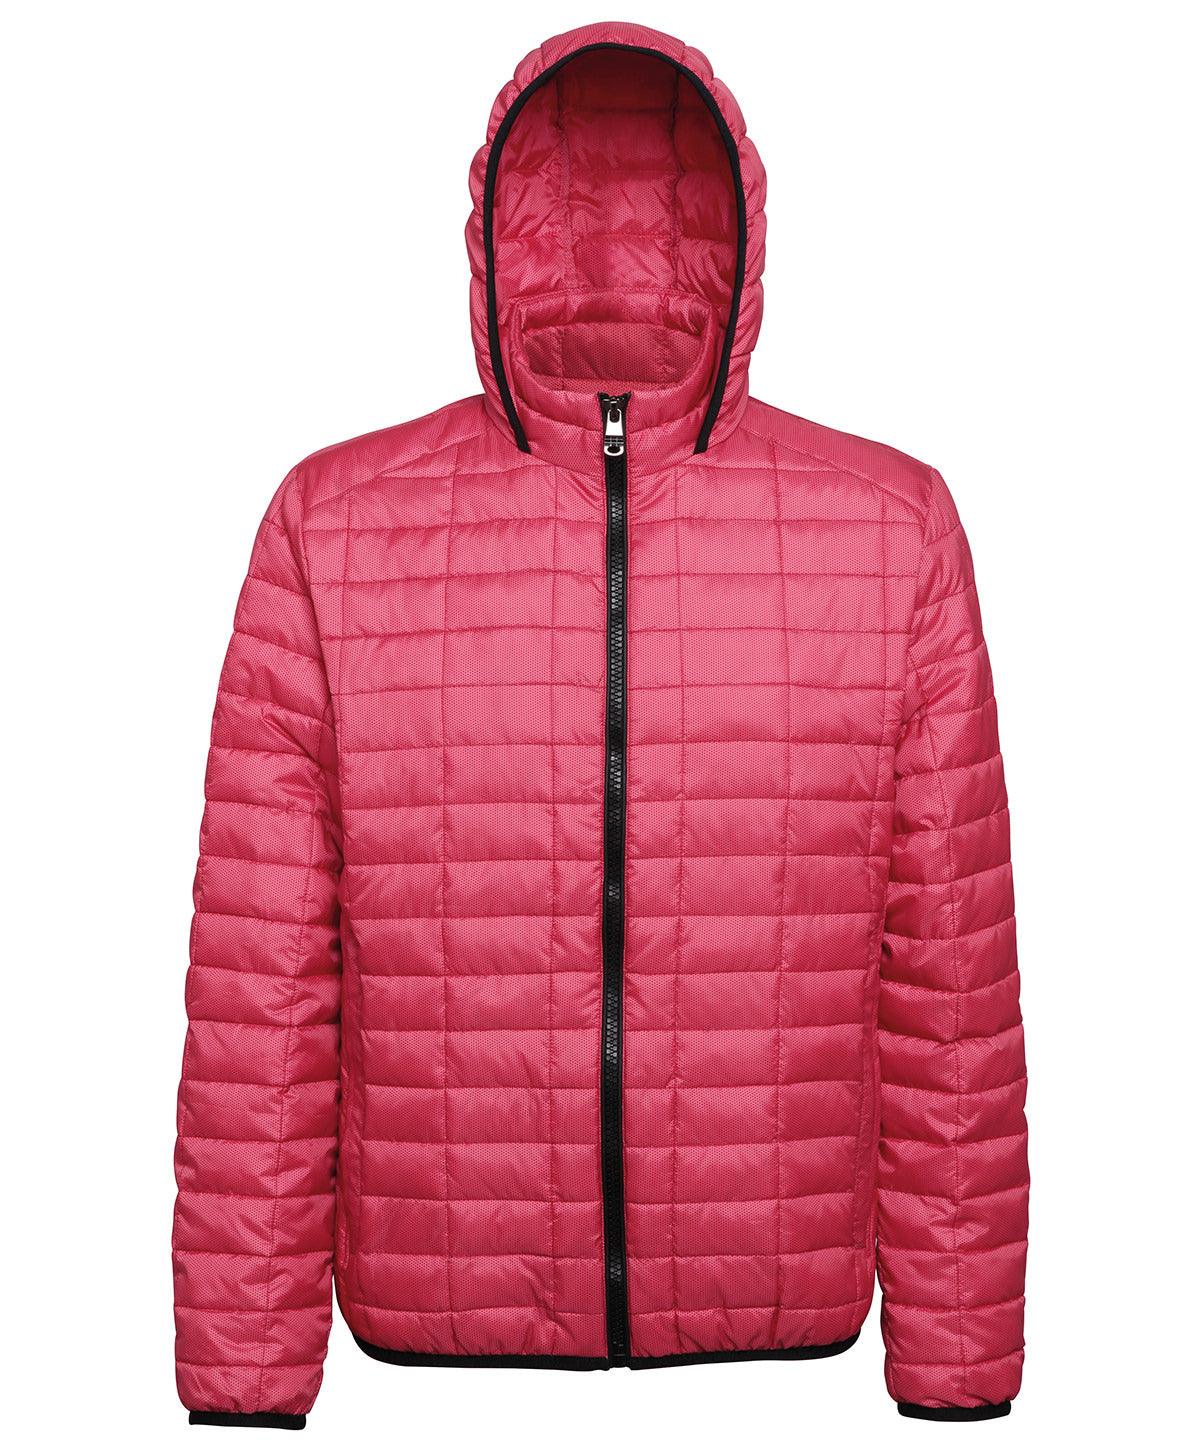 Red - Honeycomb hooded jacket Jackets 2786 Jackets & Coats, Padded & Insulation, Padded Perfection, Plus Sizes, Rebrandable Schoolwear Centres